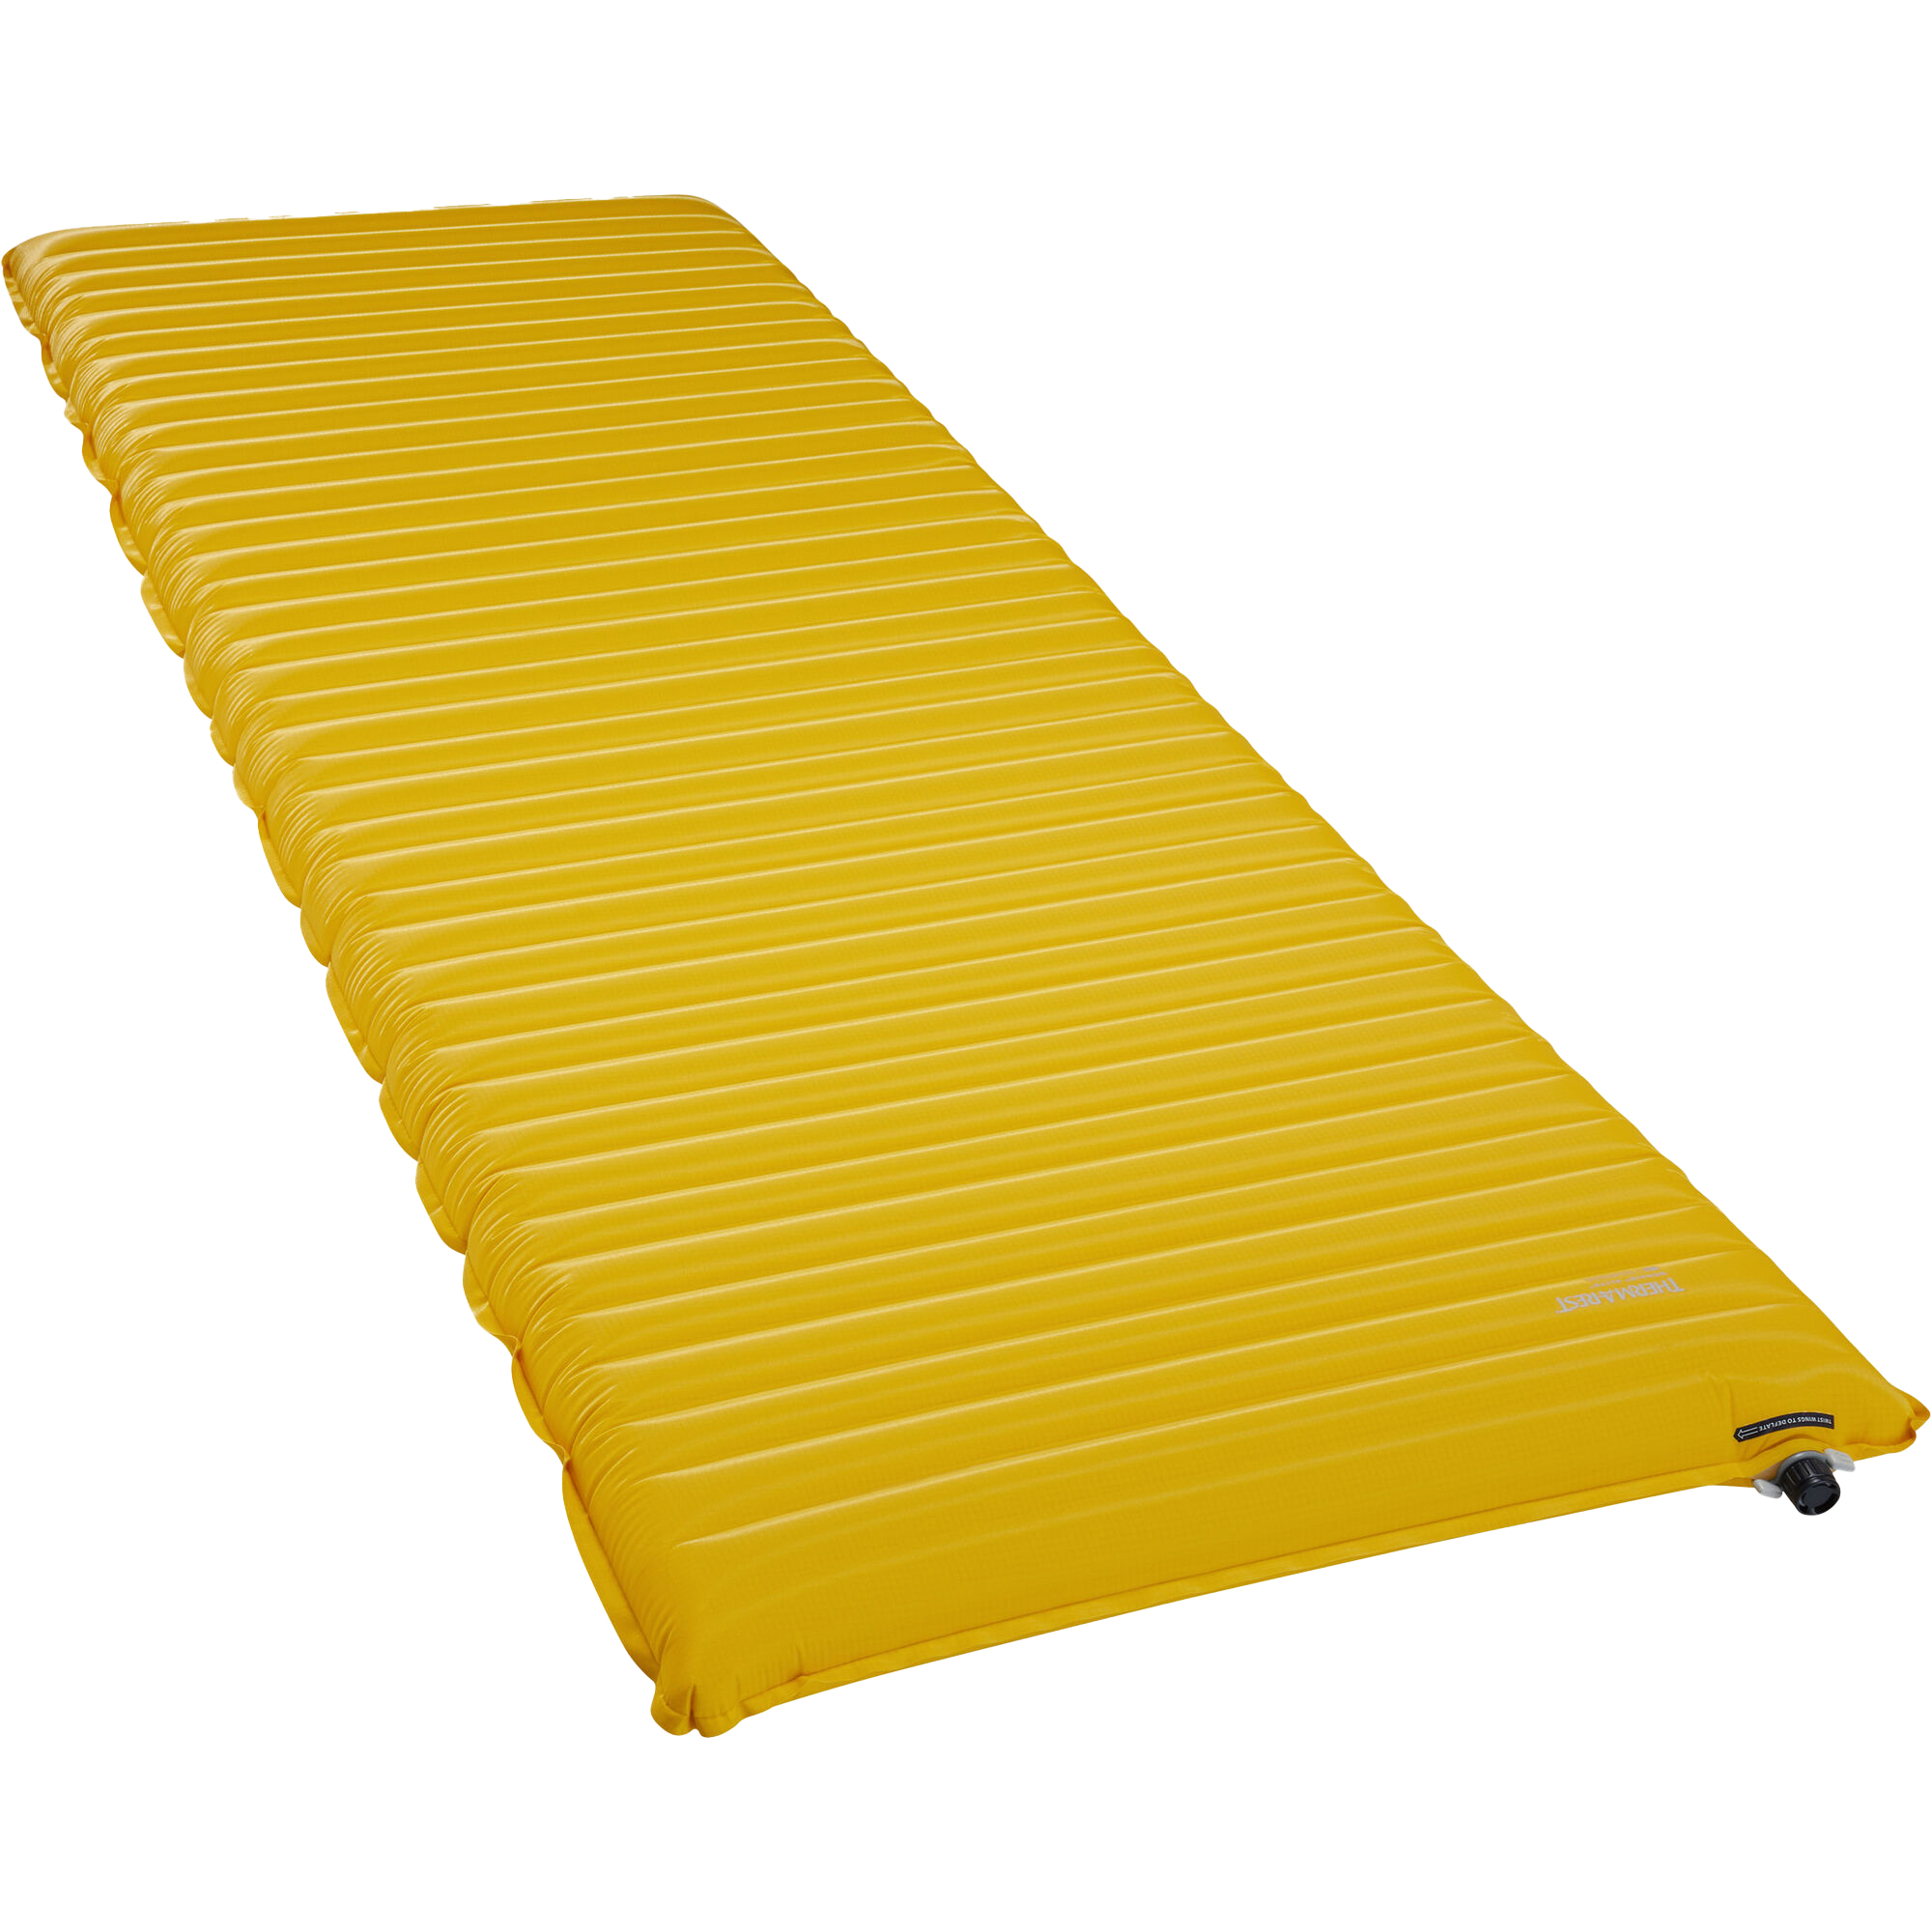 Photos - Camping Mat Therm-a-Rest ThermaRest NeoAir Xlite NXT MAX Regular Wide , Solar Flare 1163 